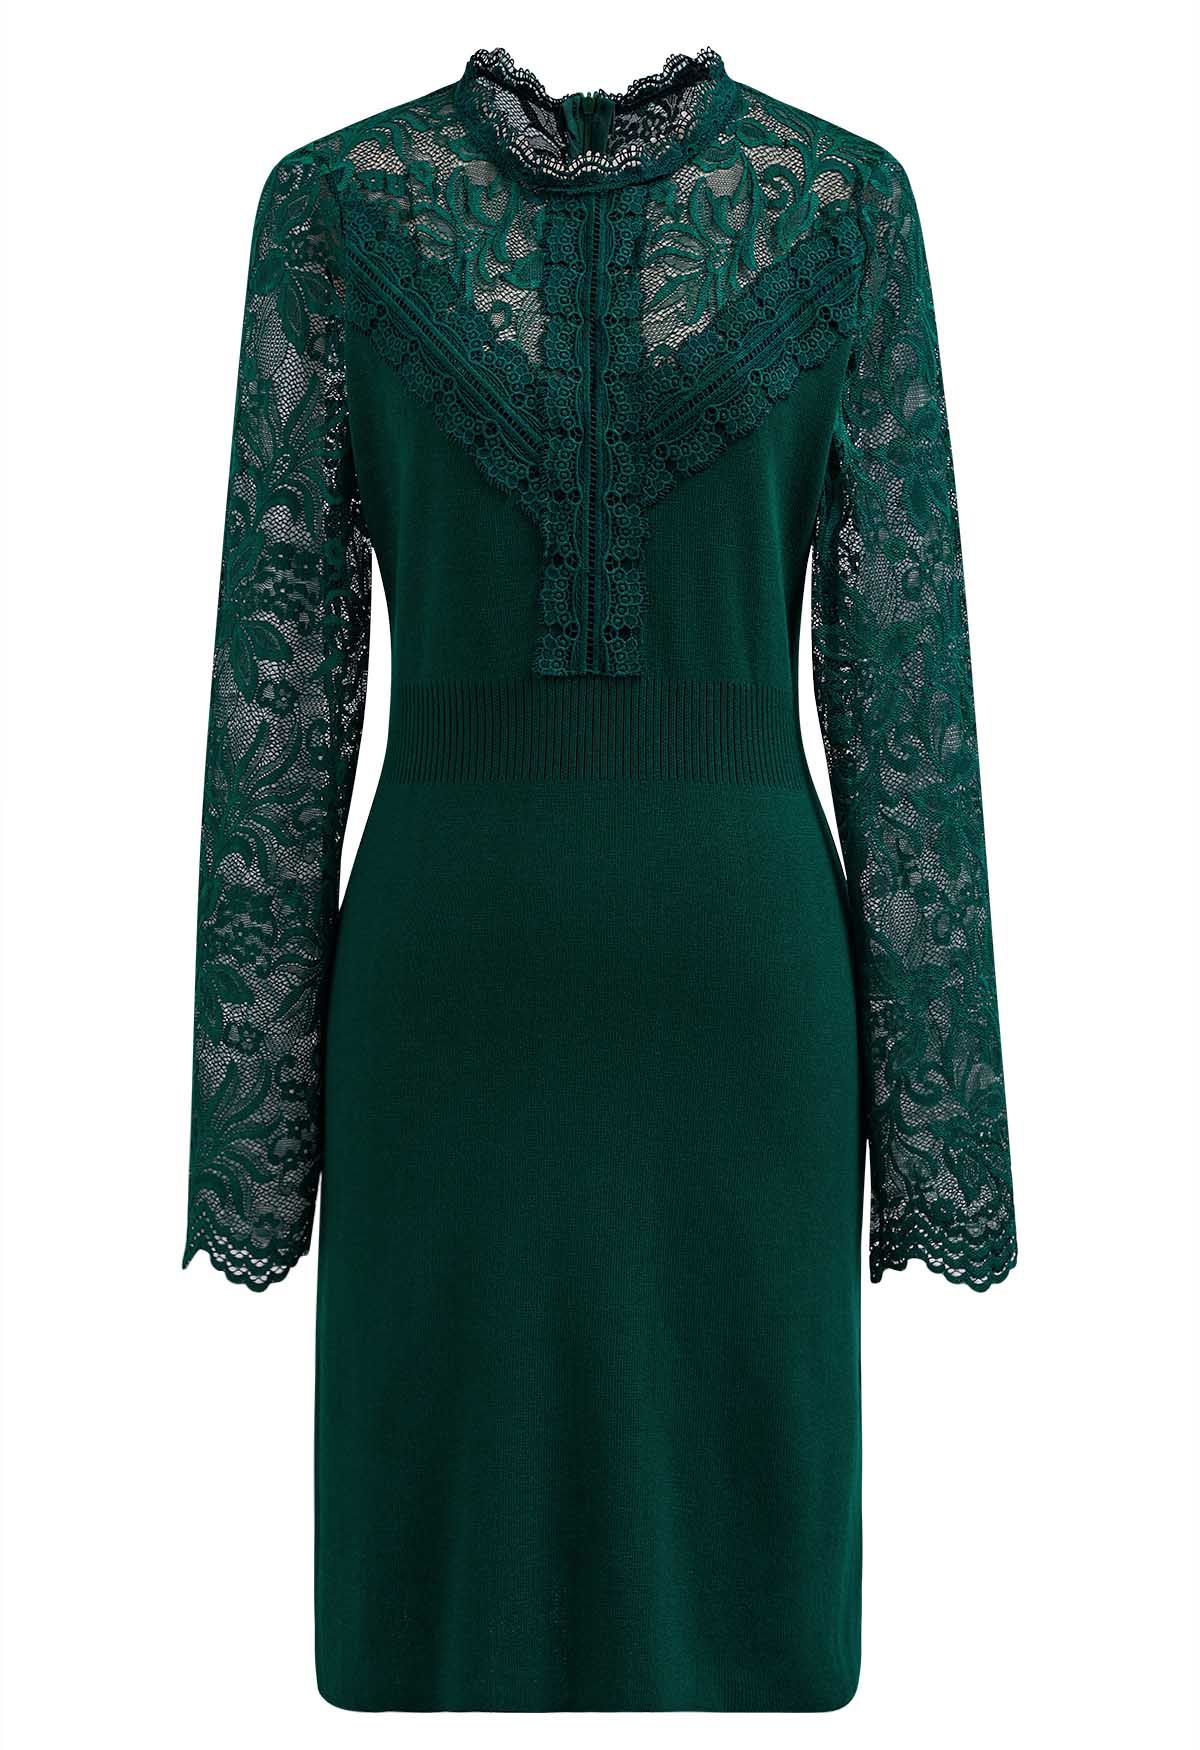 Floral Lace Spliced Knit Dress in Dark Green - Retro, Indie and